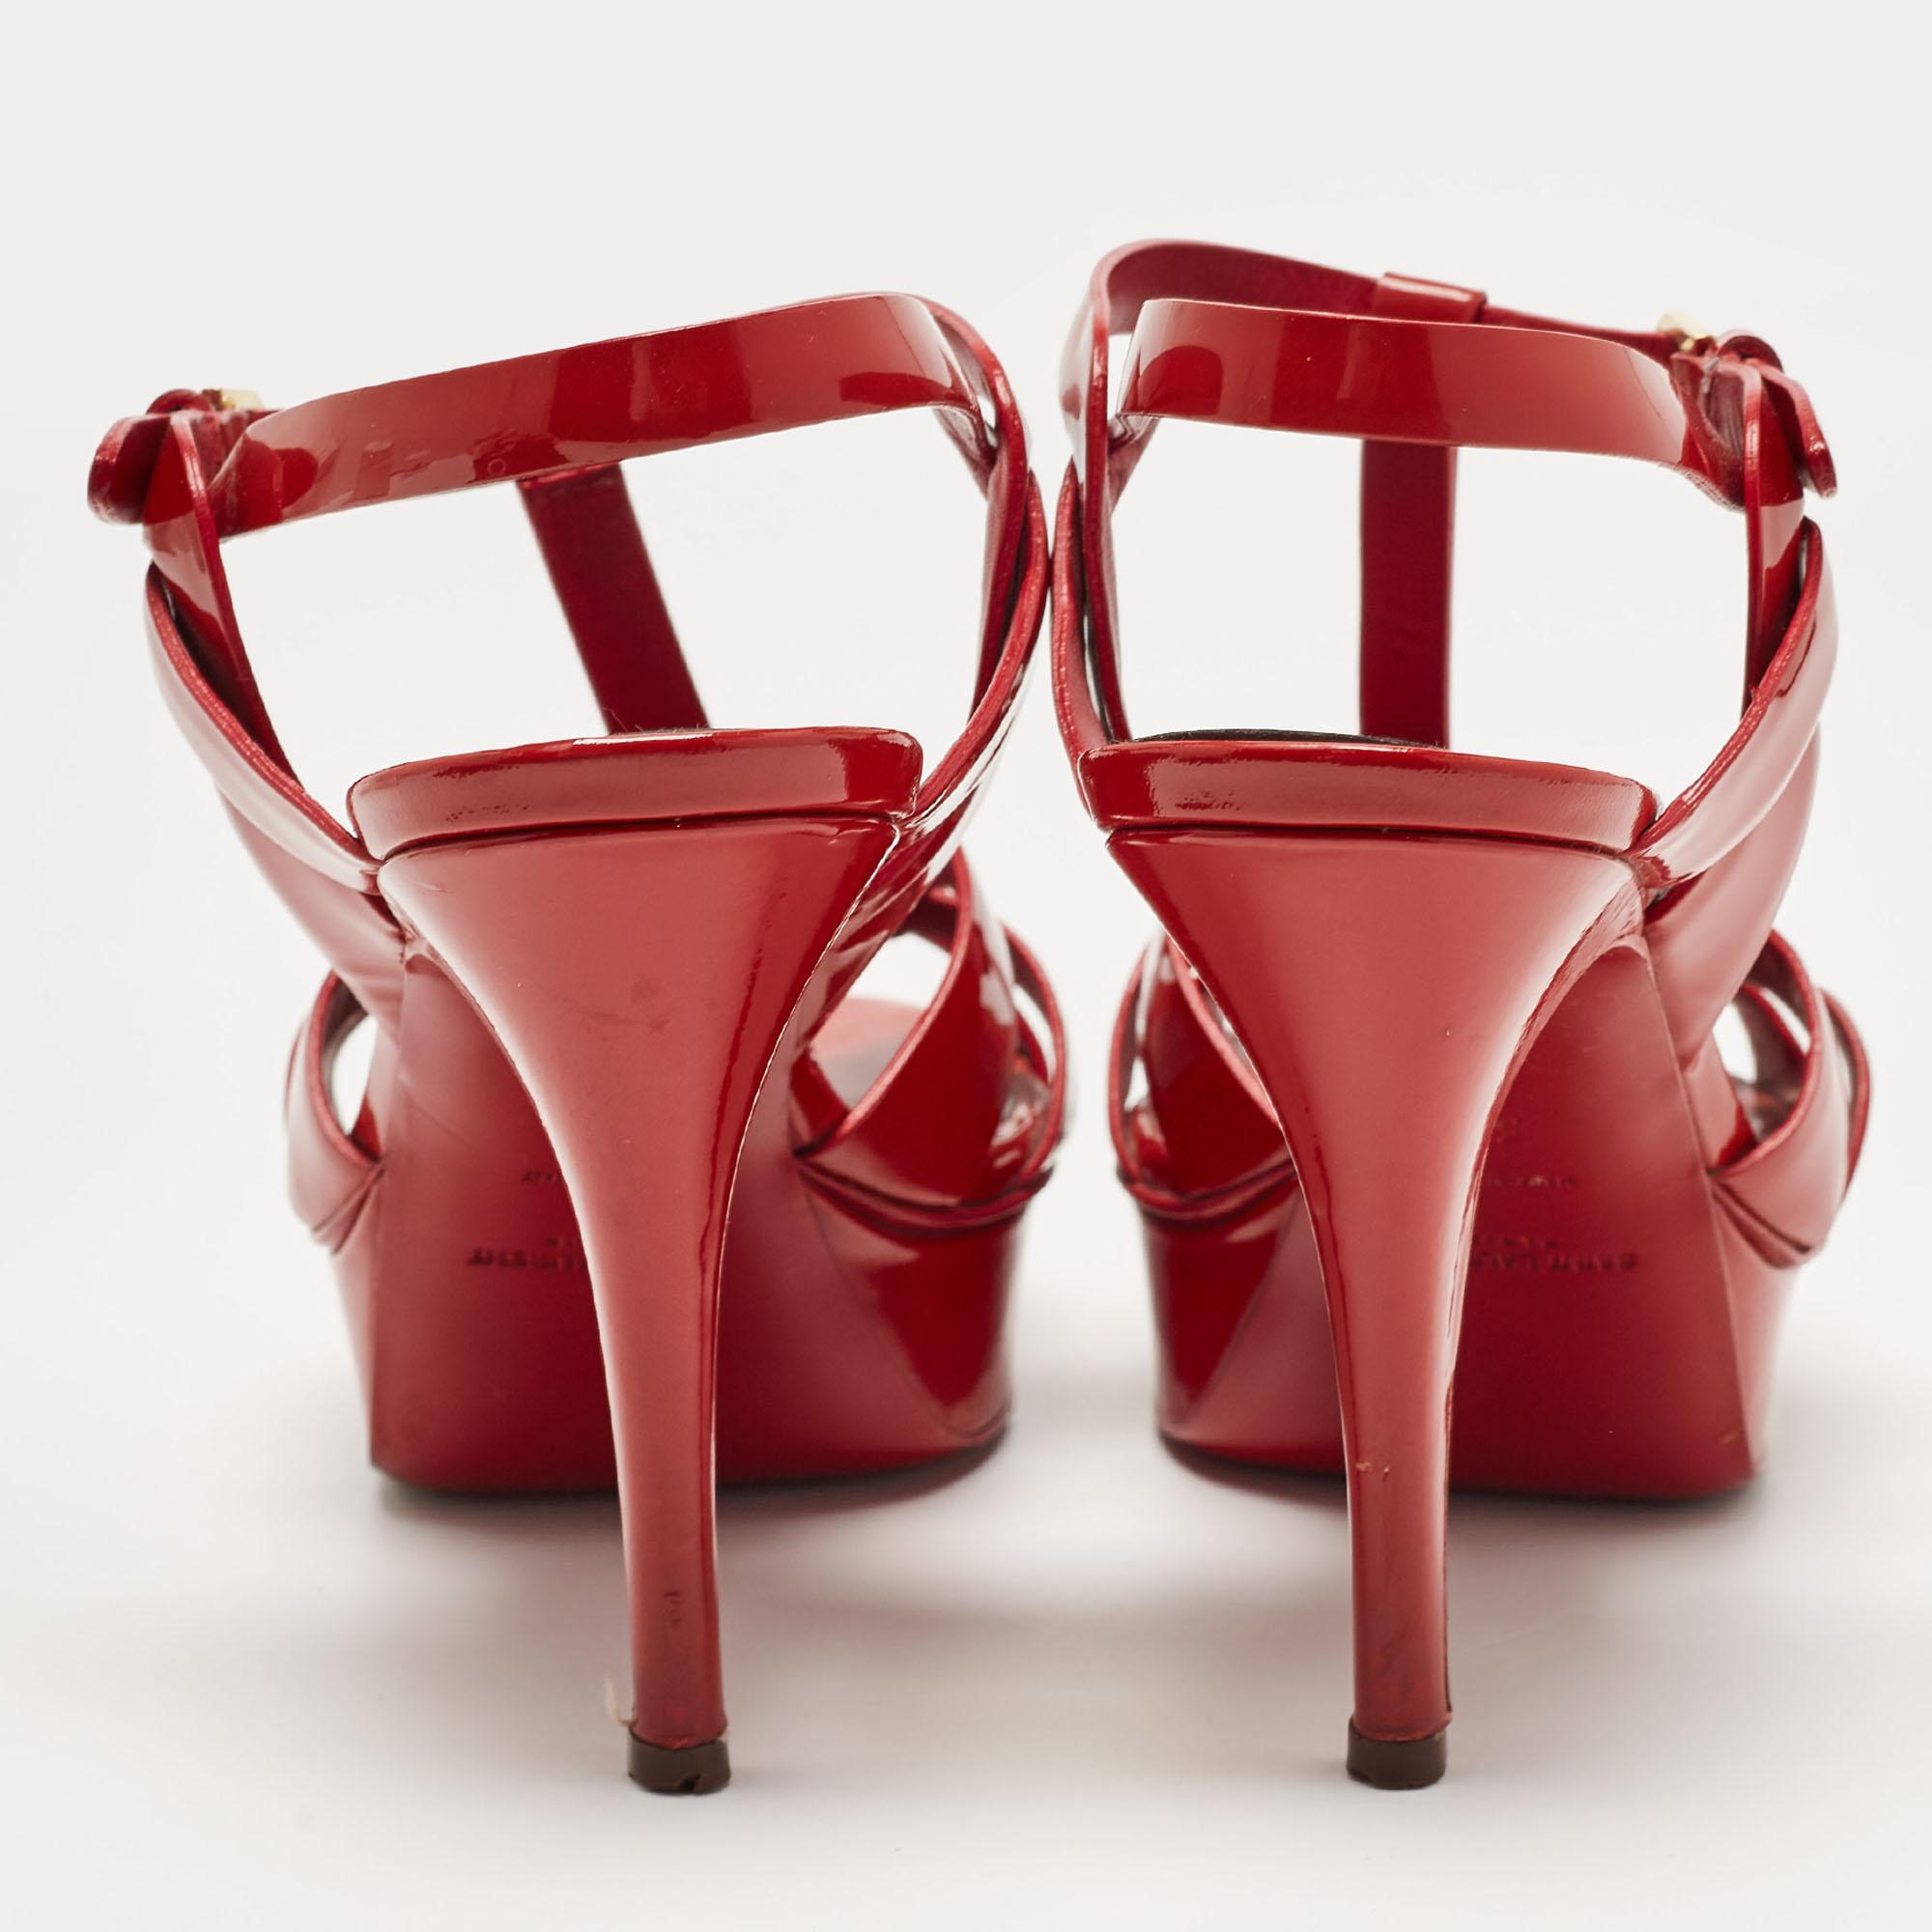 Saint Laurent Red Patent Leather Tribute Sandals Size 38 For Sale 4